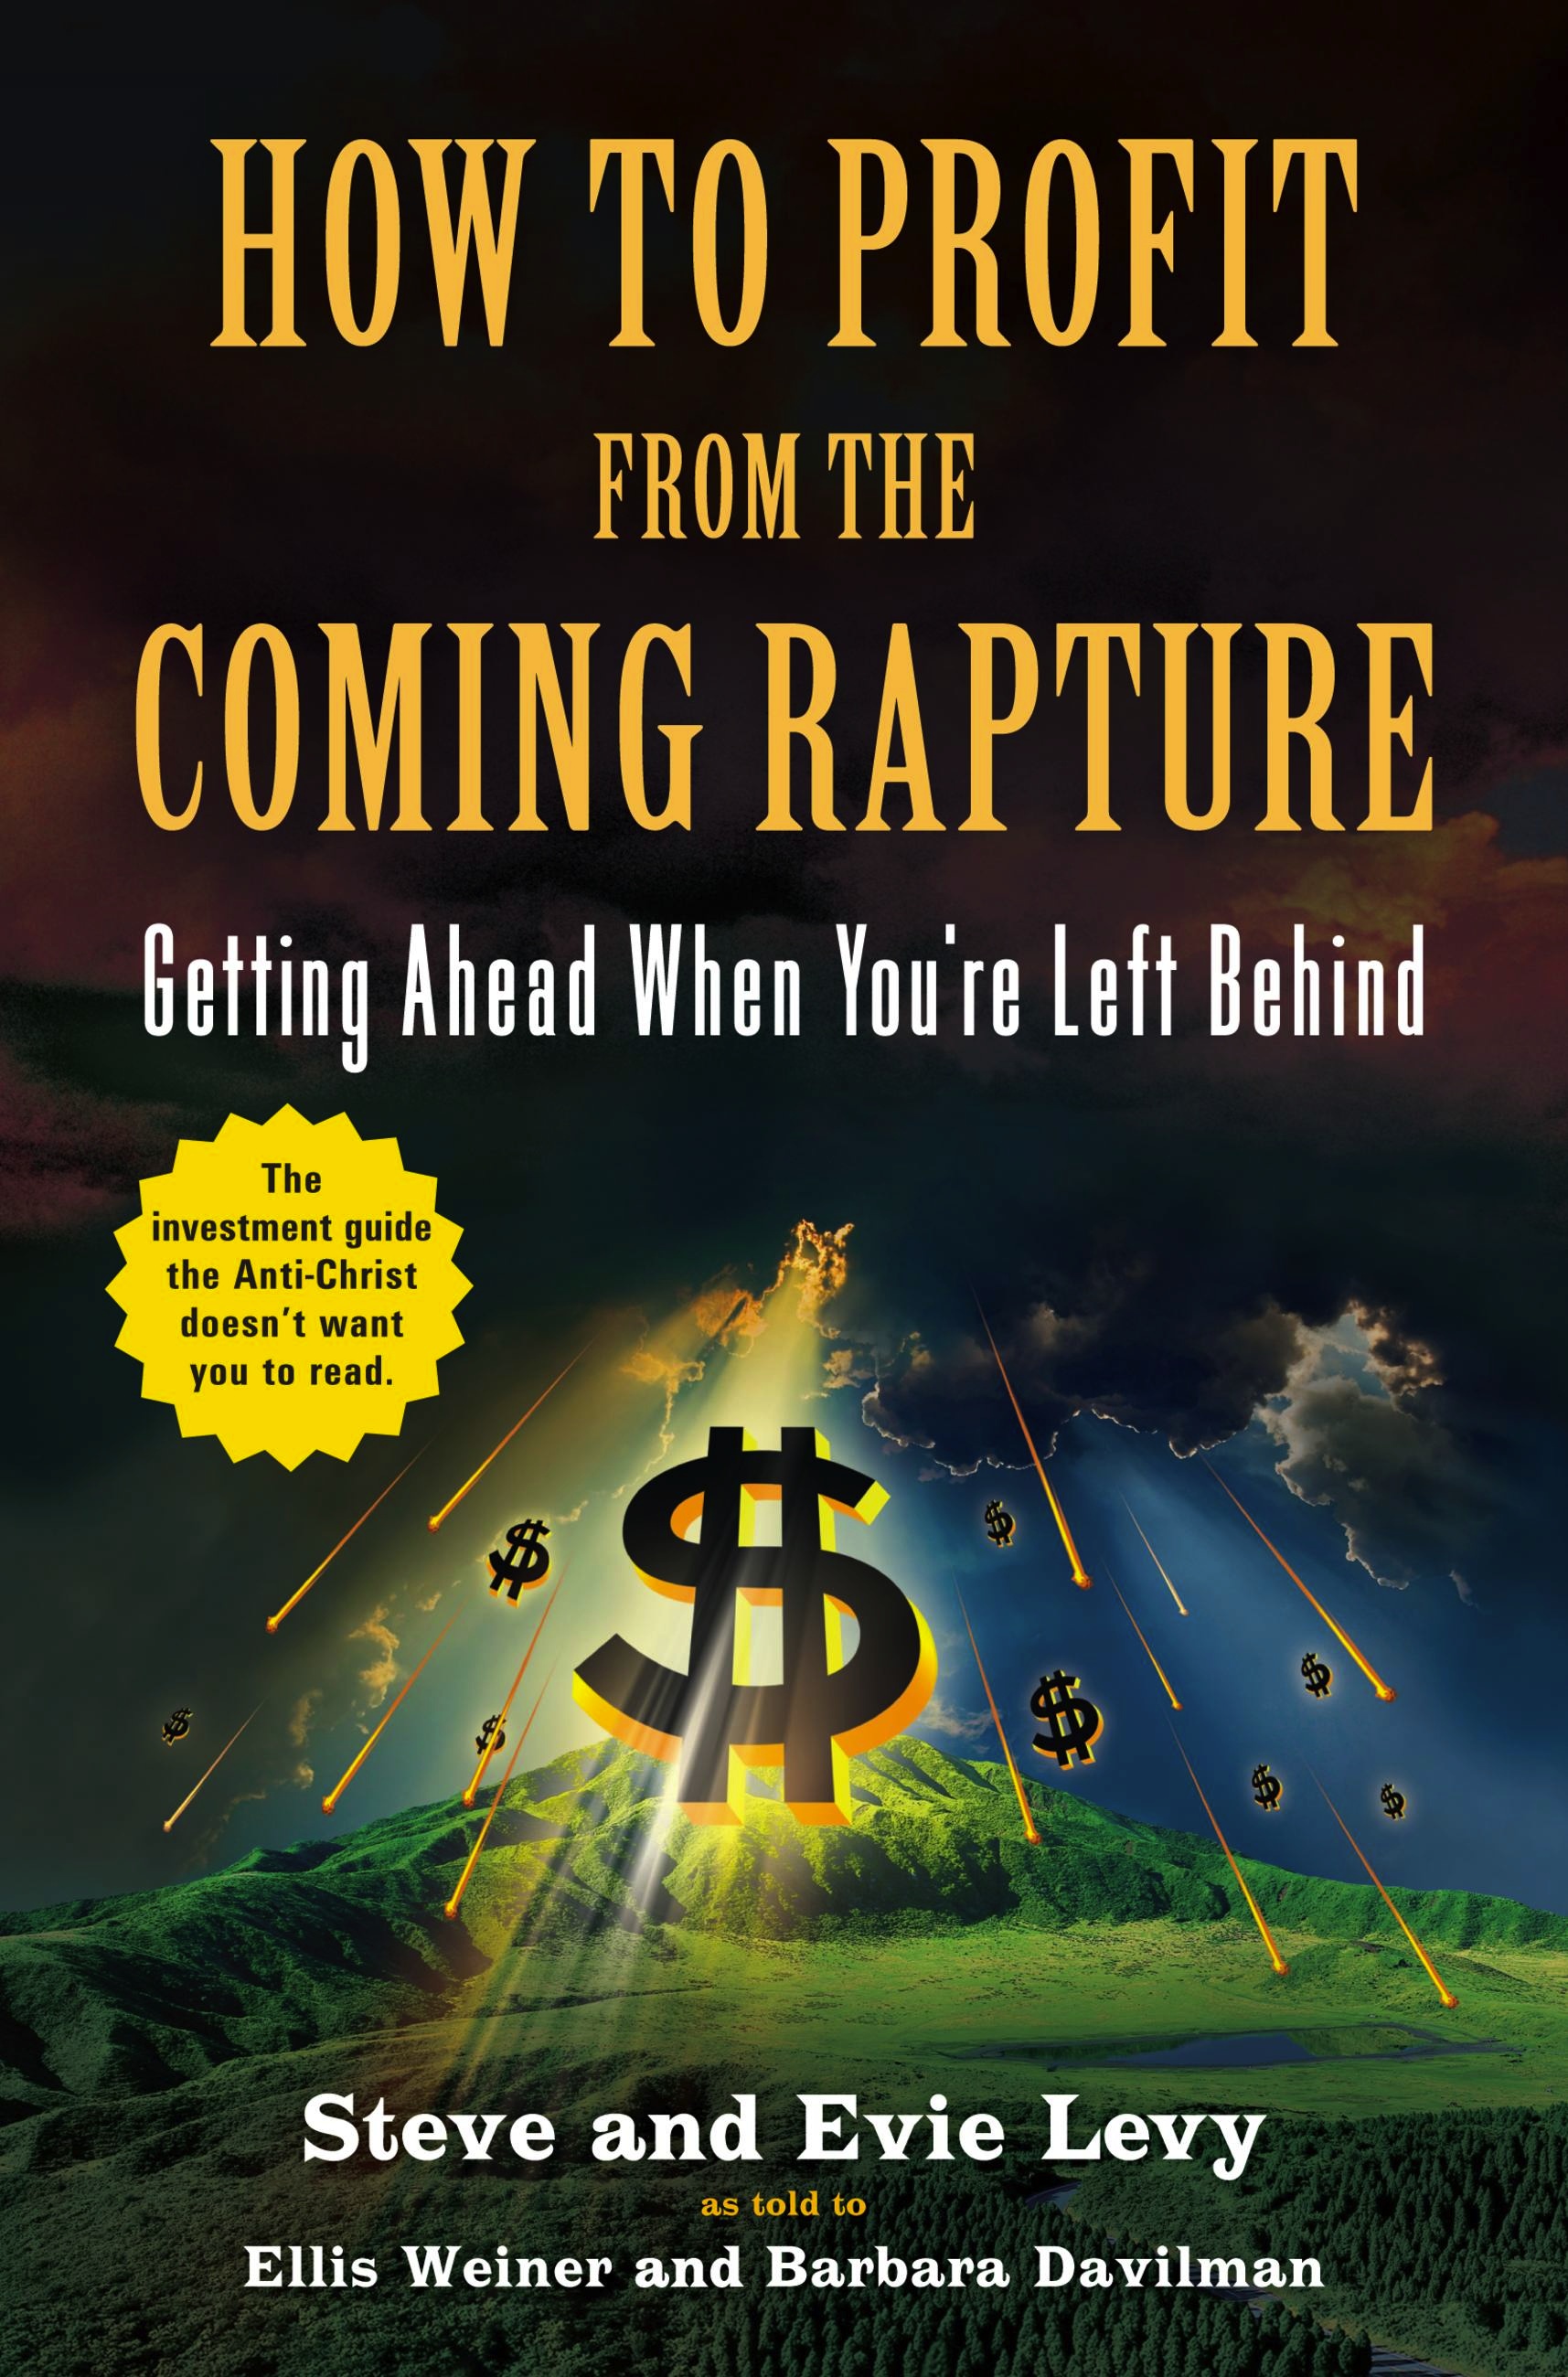 How to Profit From the Coming Rapture by Ellis Weiner | Little